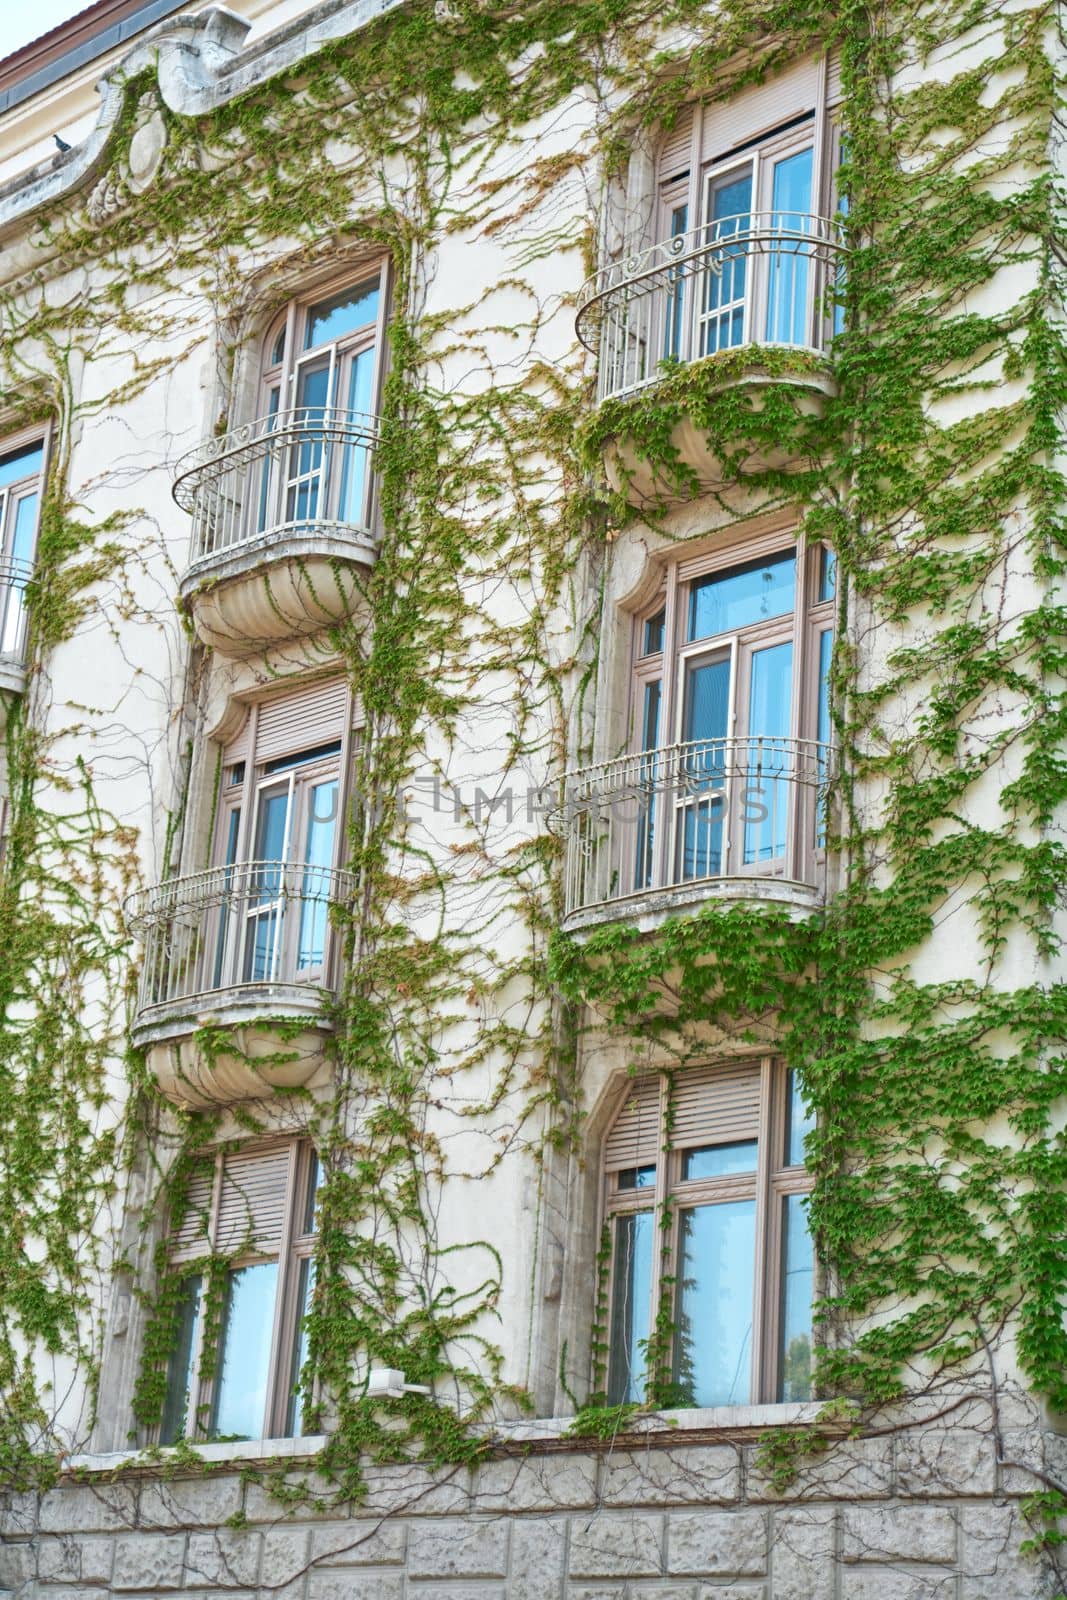 The architecture of old Europe. A building with a green plant weaving along the wall.